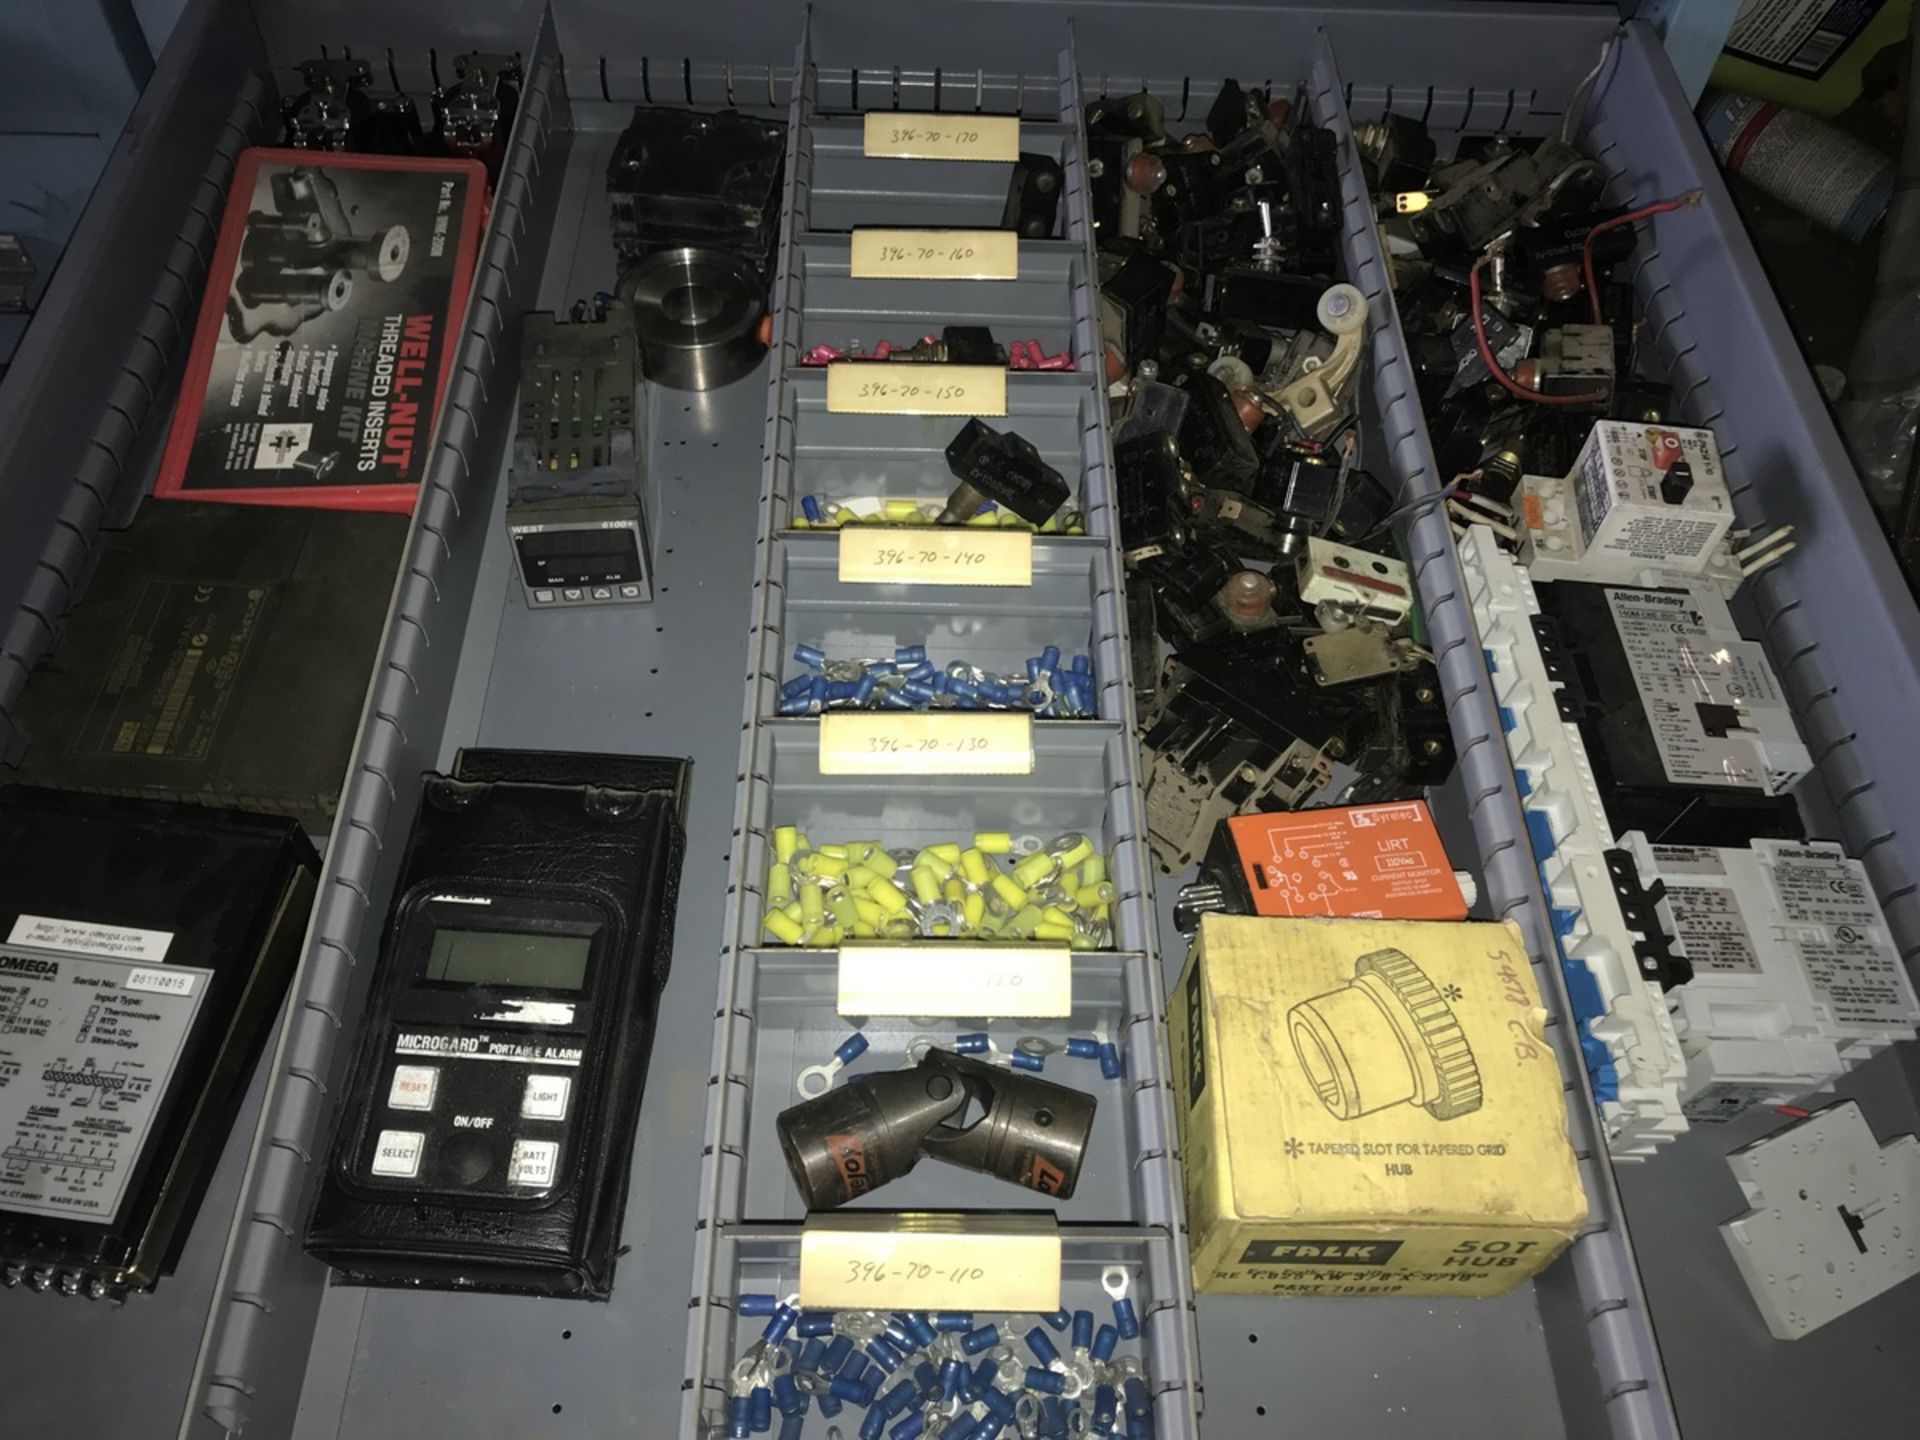 Contents of Drawer including input modules, switches, helicoils, Allen bradley starters, O2 meter